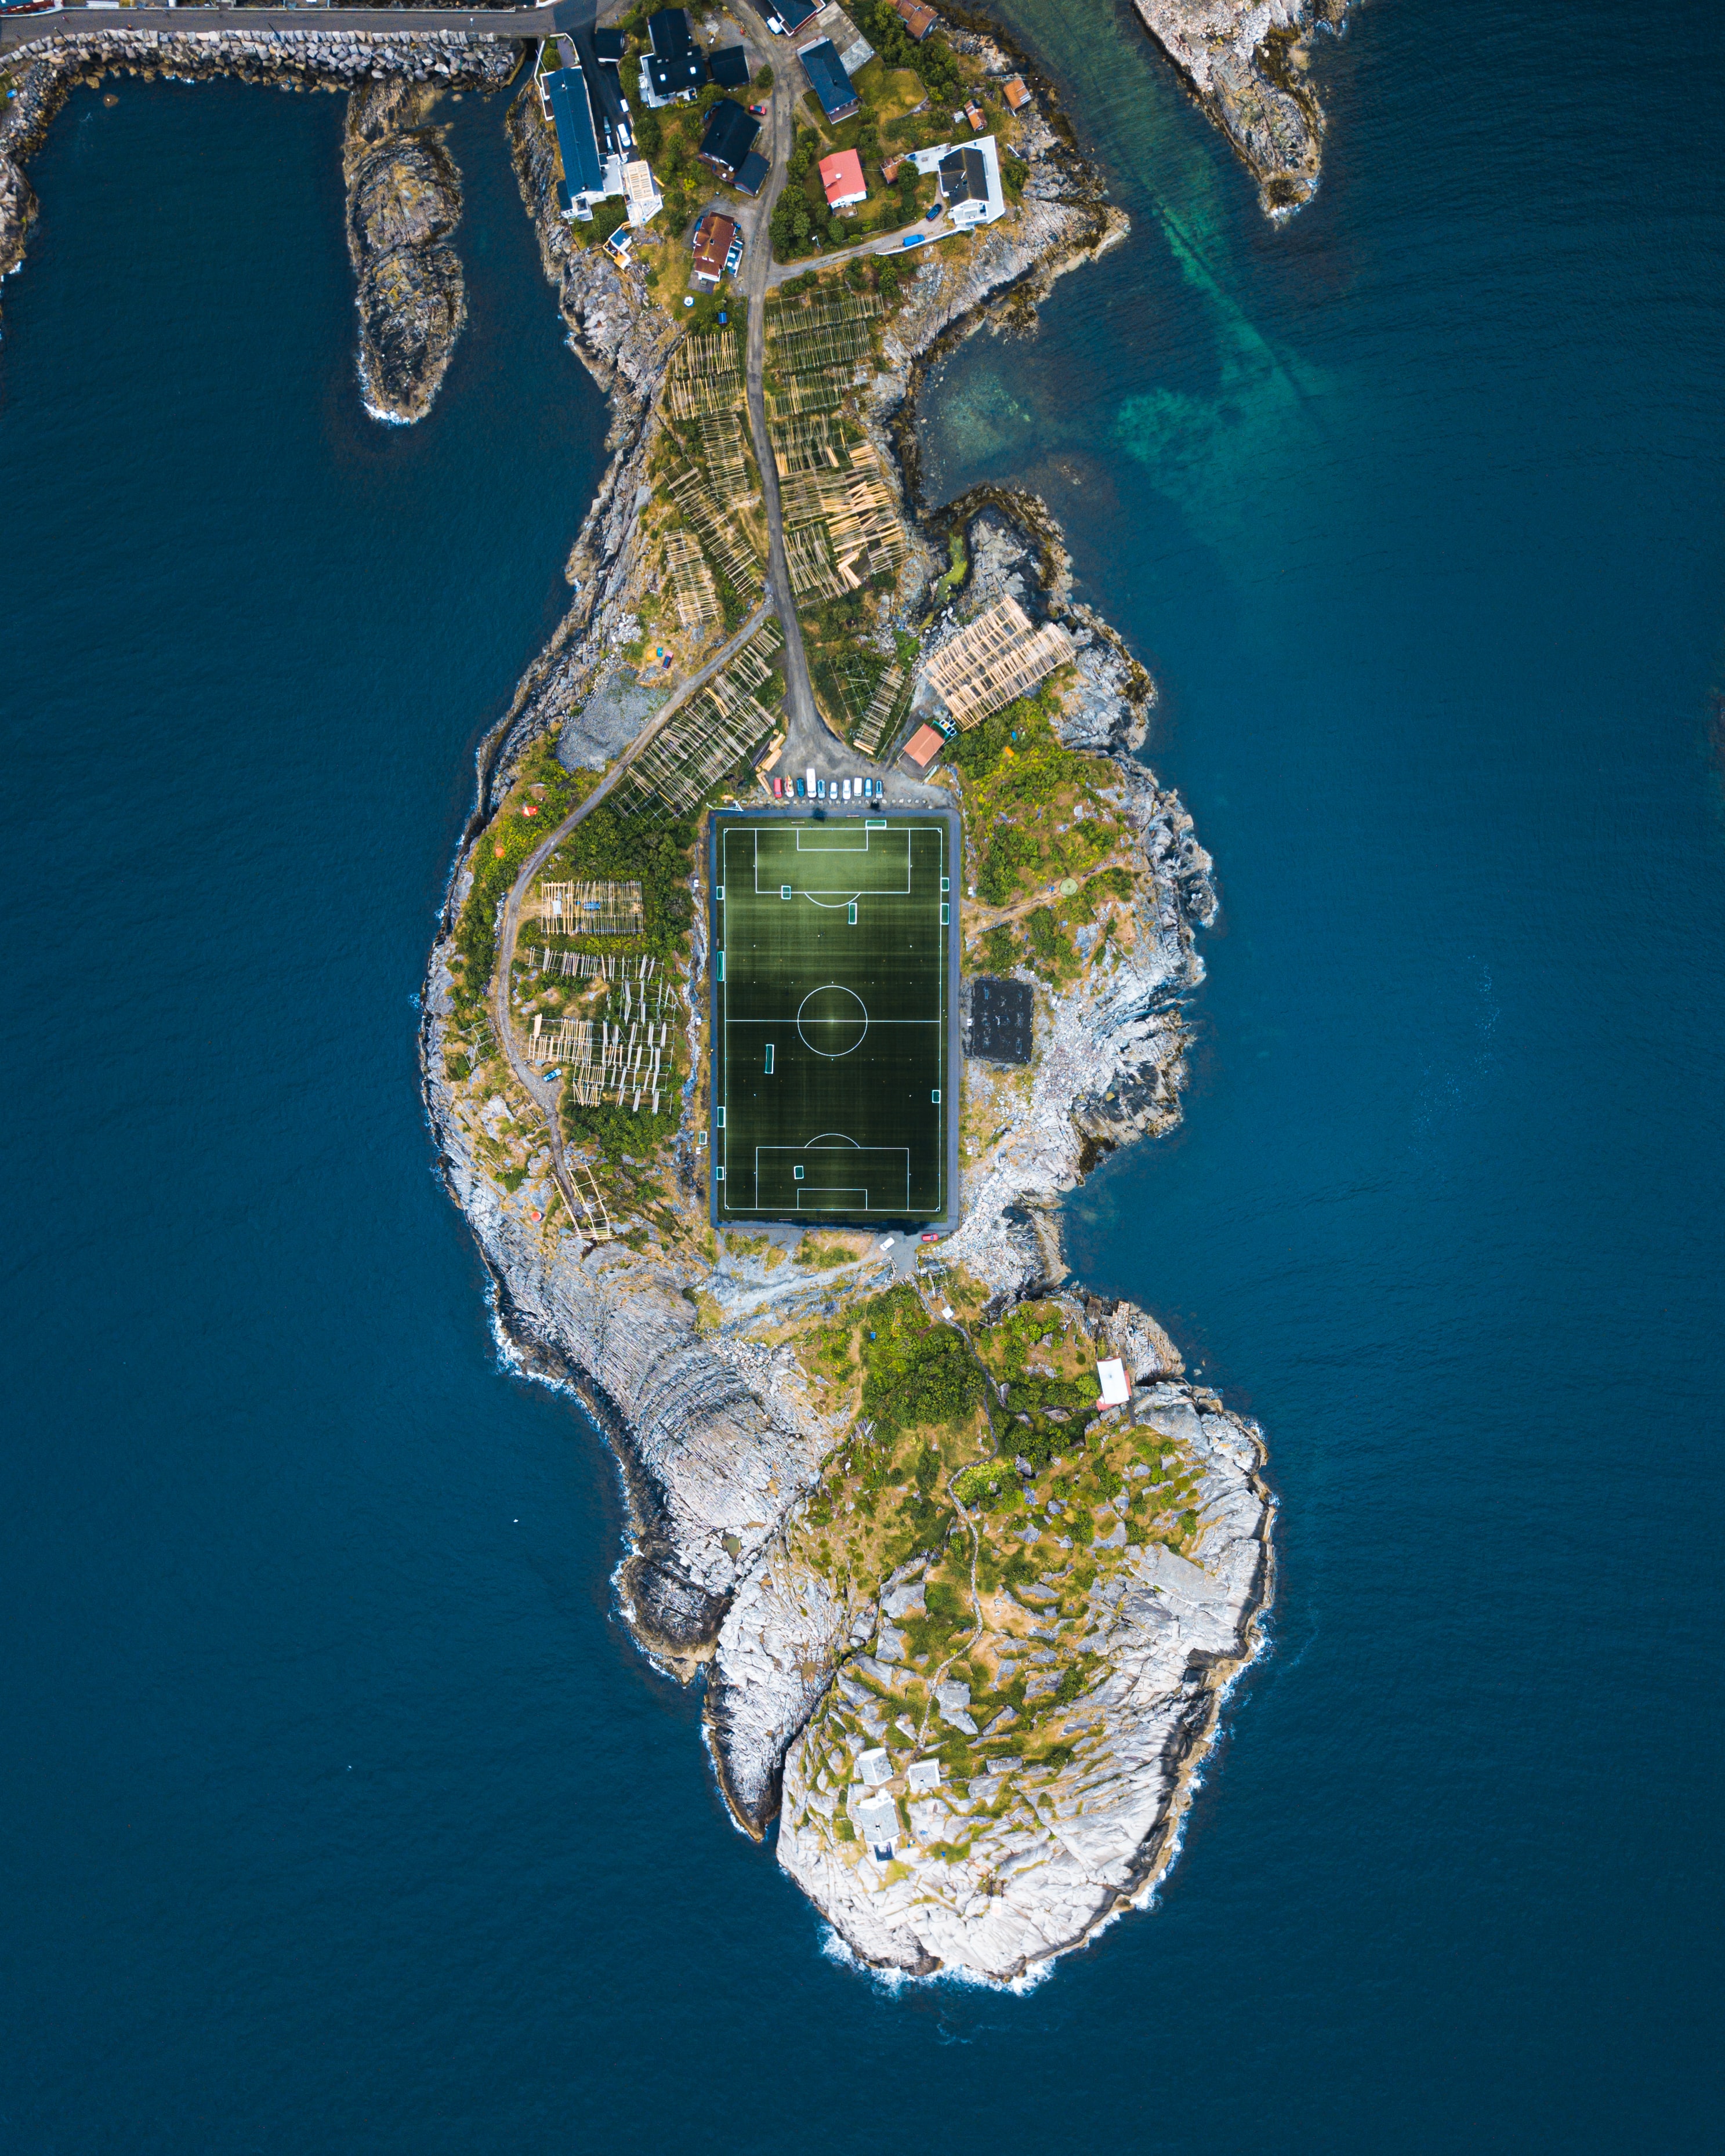 stadium, nature, sea, city, view from above, island